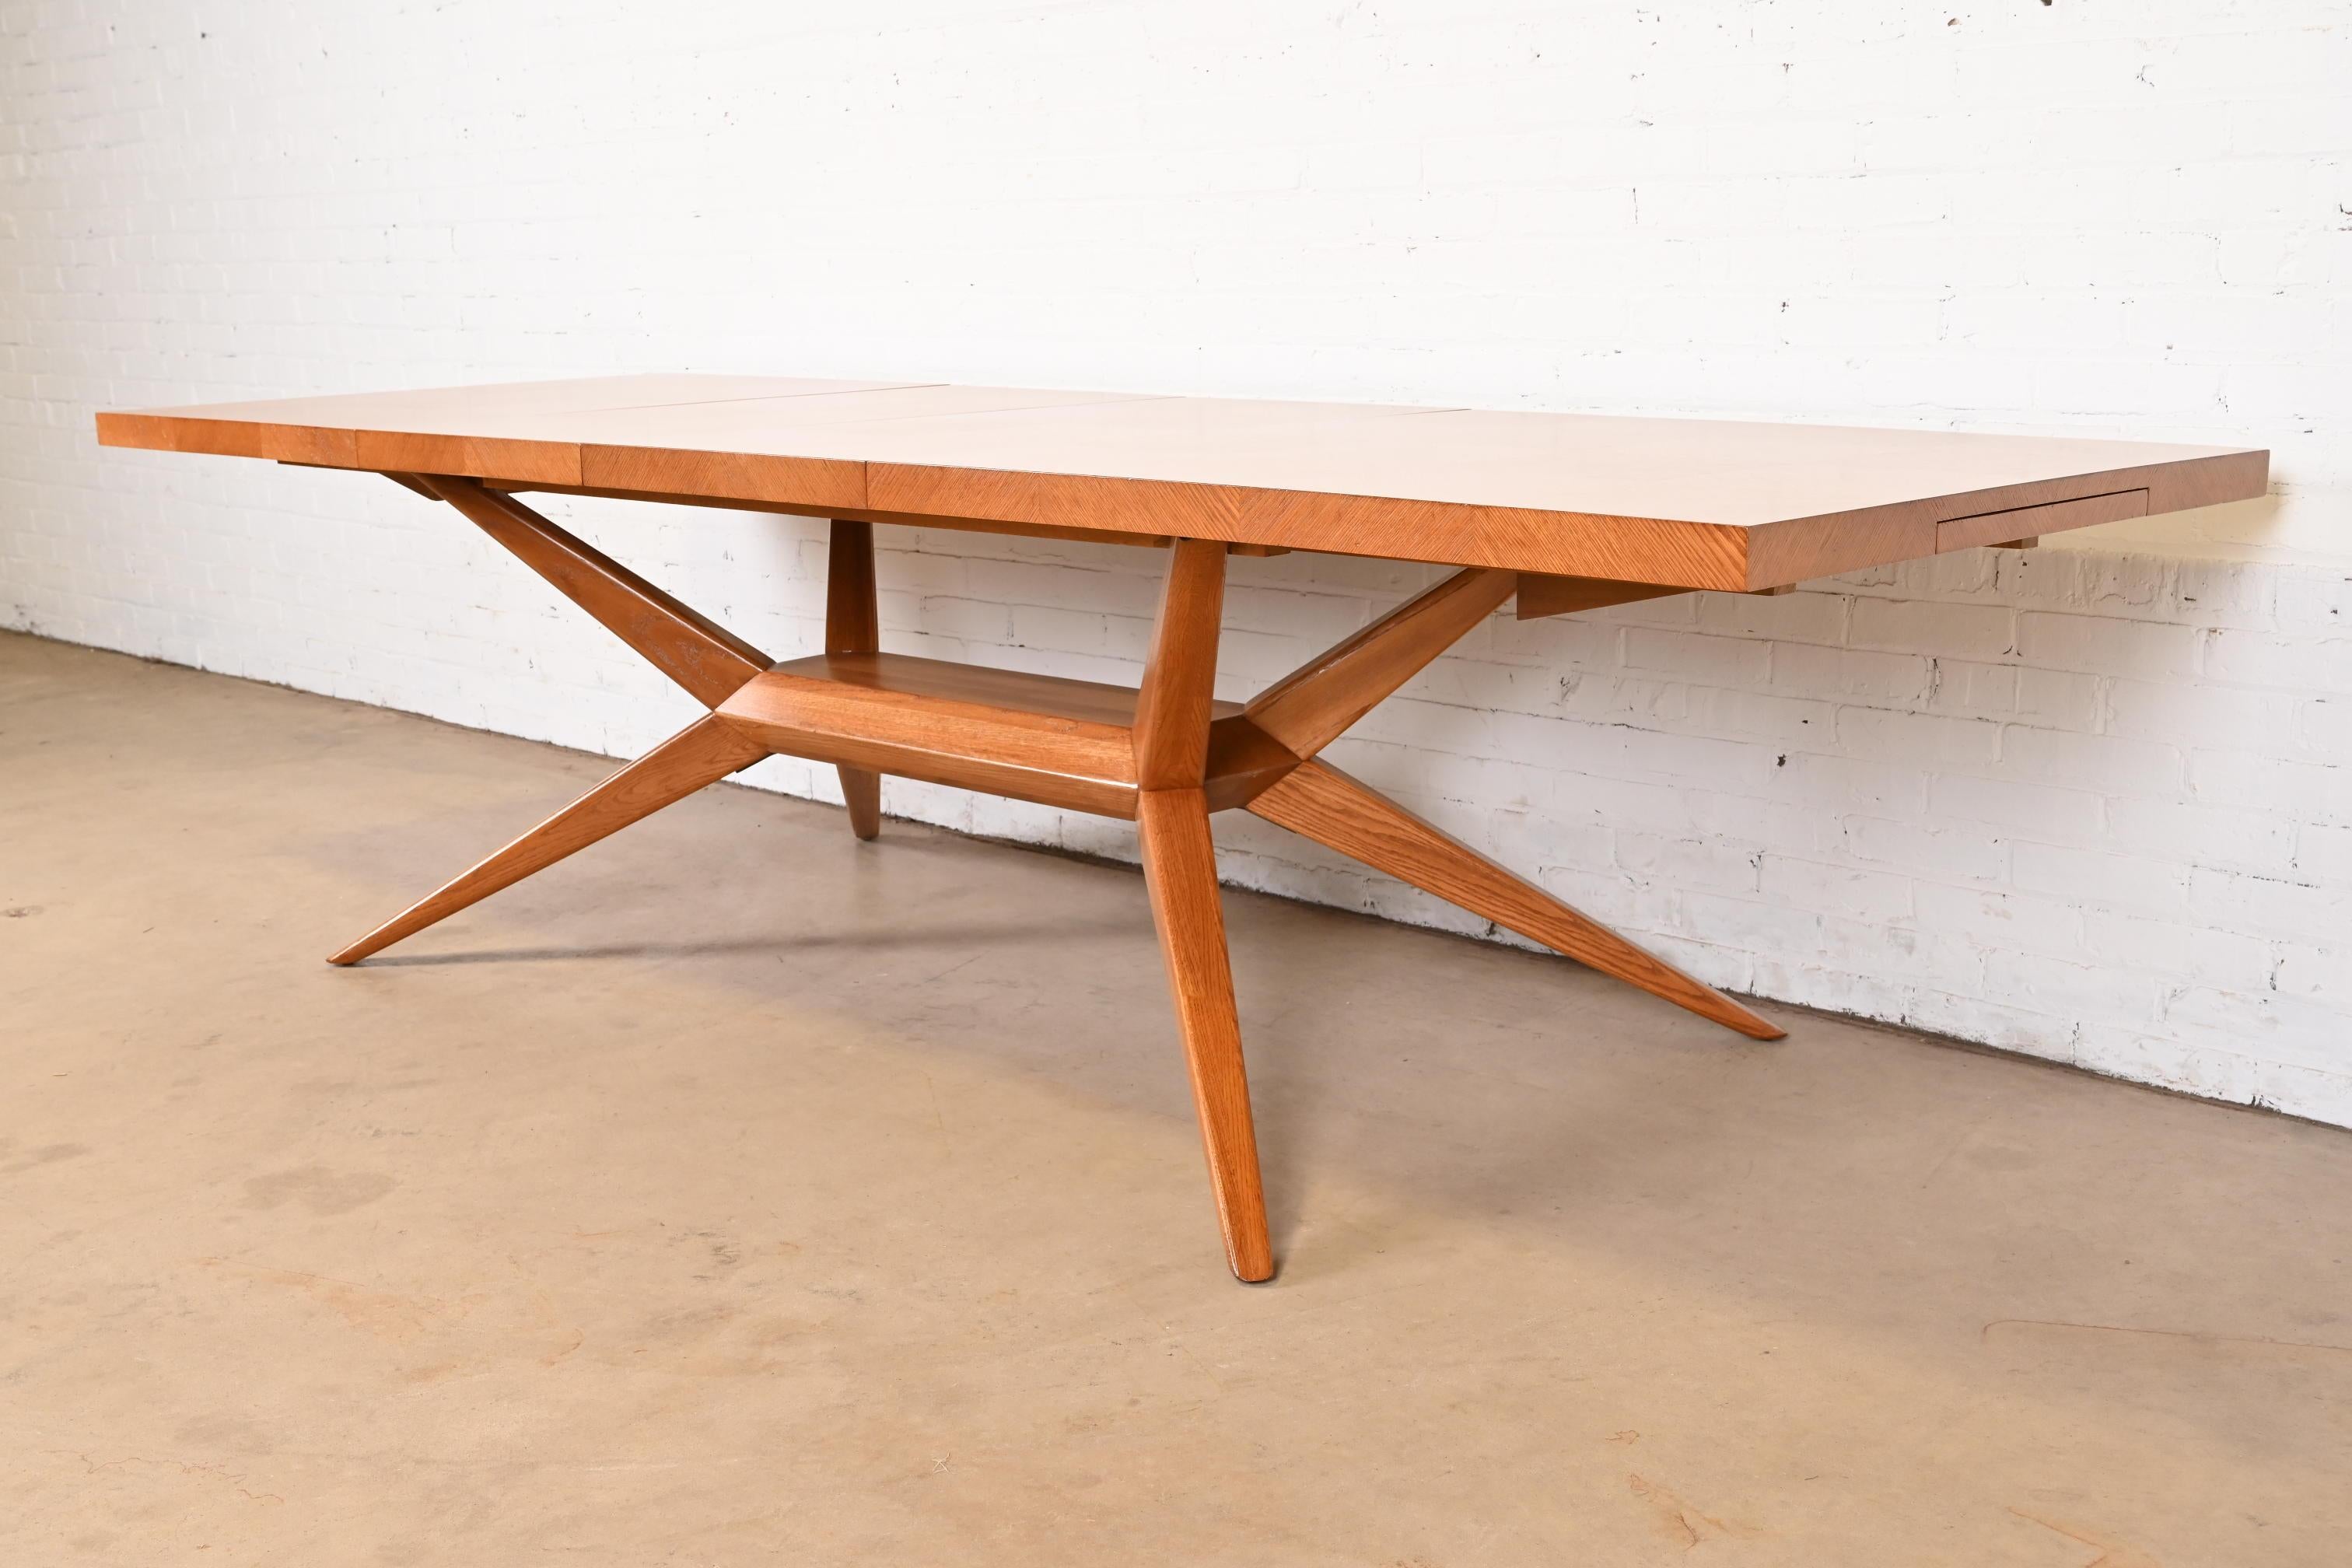 American Romweber Mid-Century Modern Oak Spider Leg Dining Table, Newly Refinished For Sale